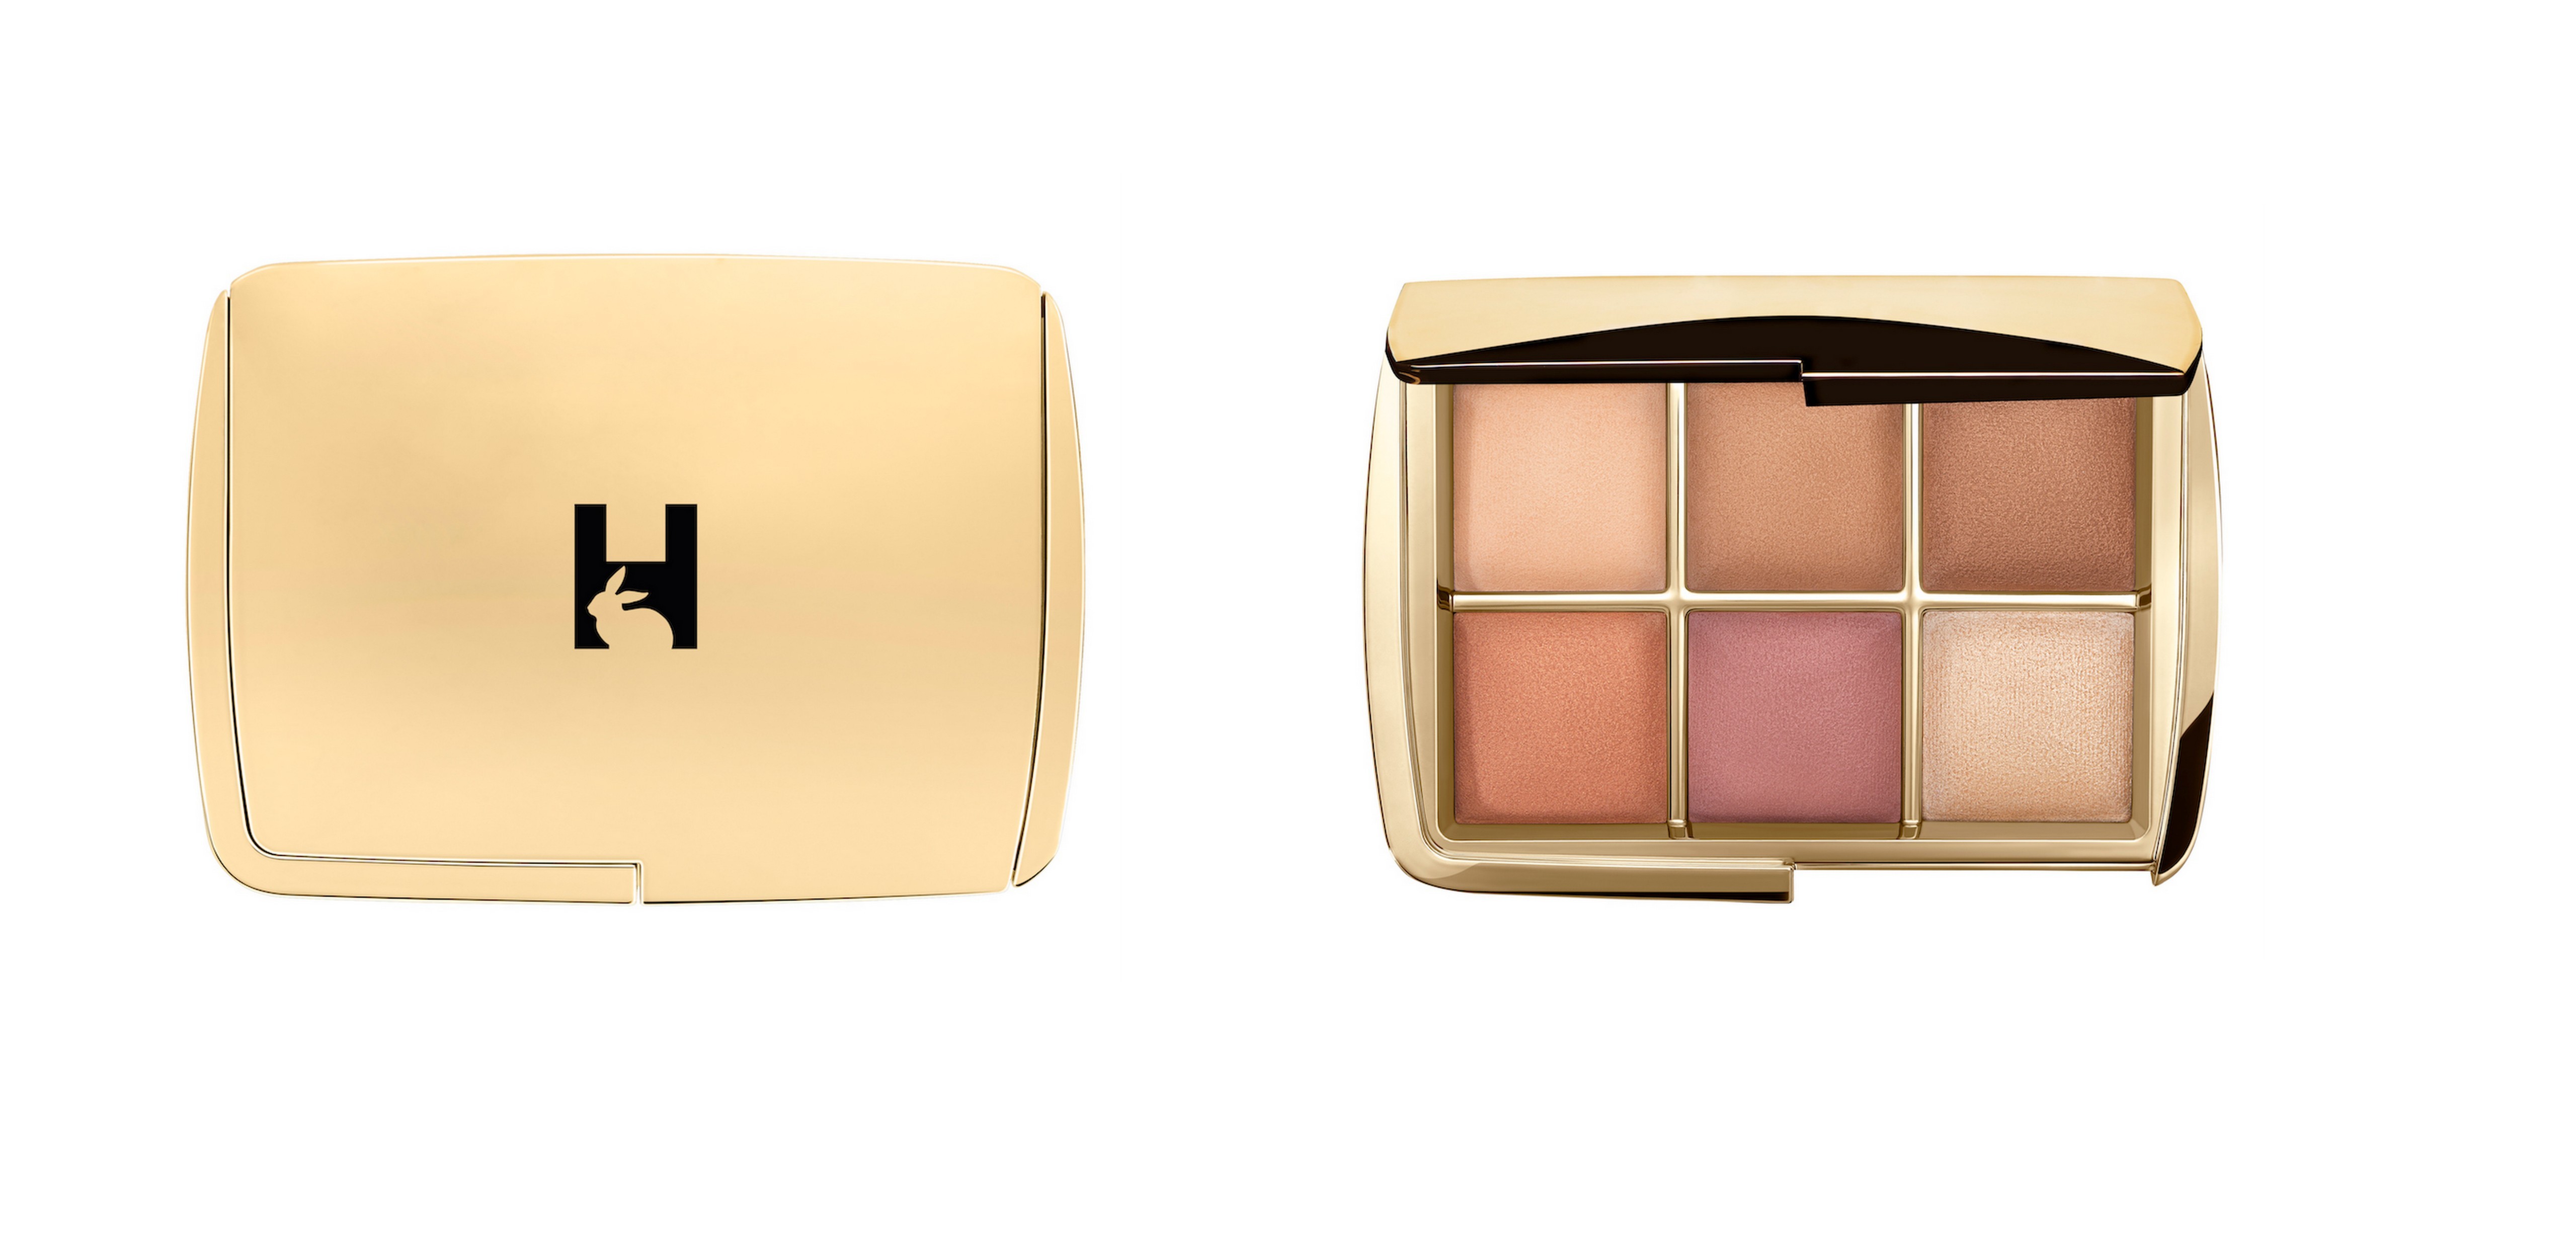 We're in love with this cruelty-conscious new Ambient Lighting Edit palette